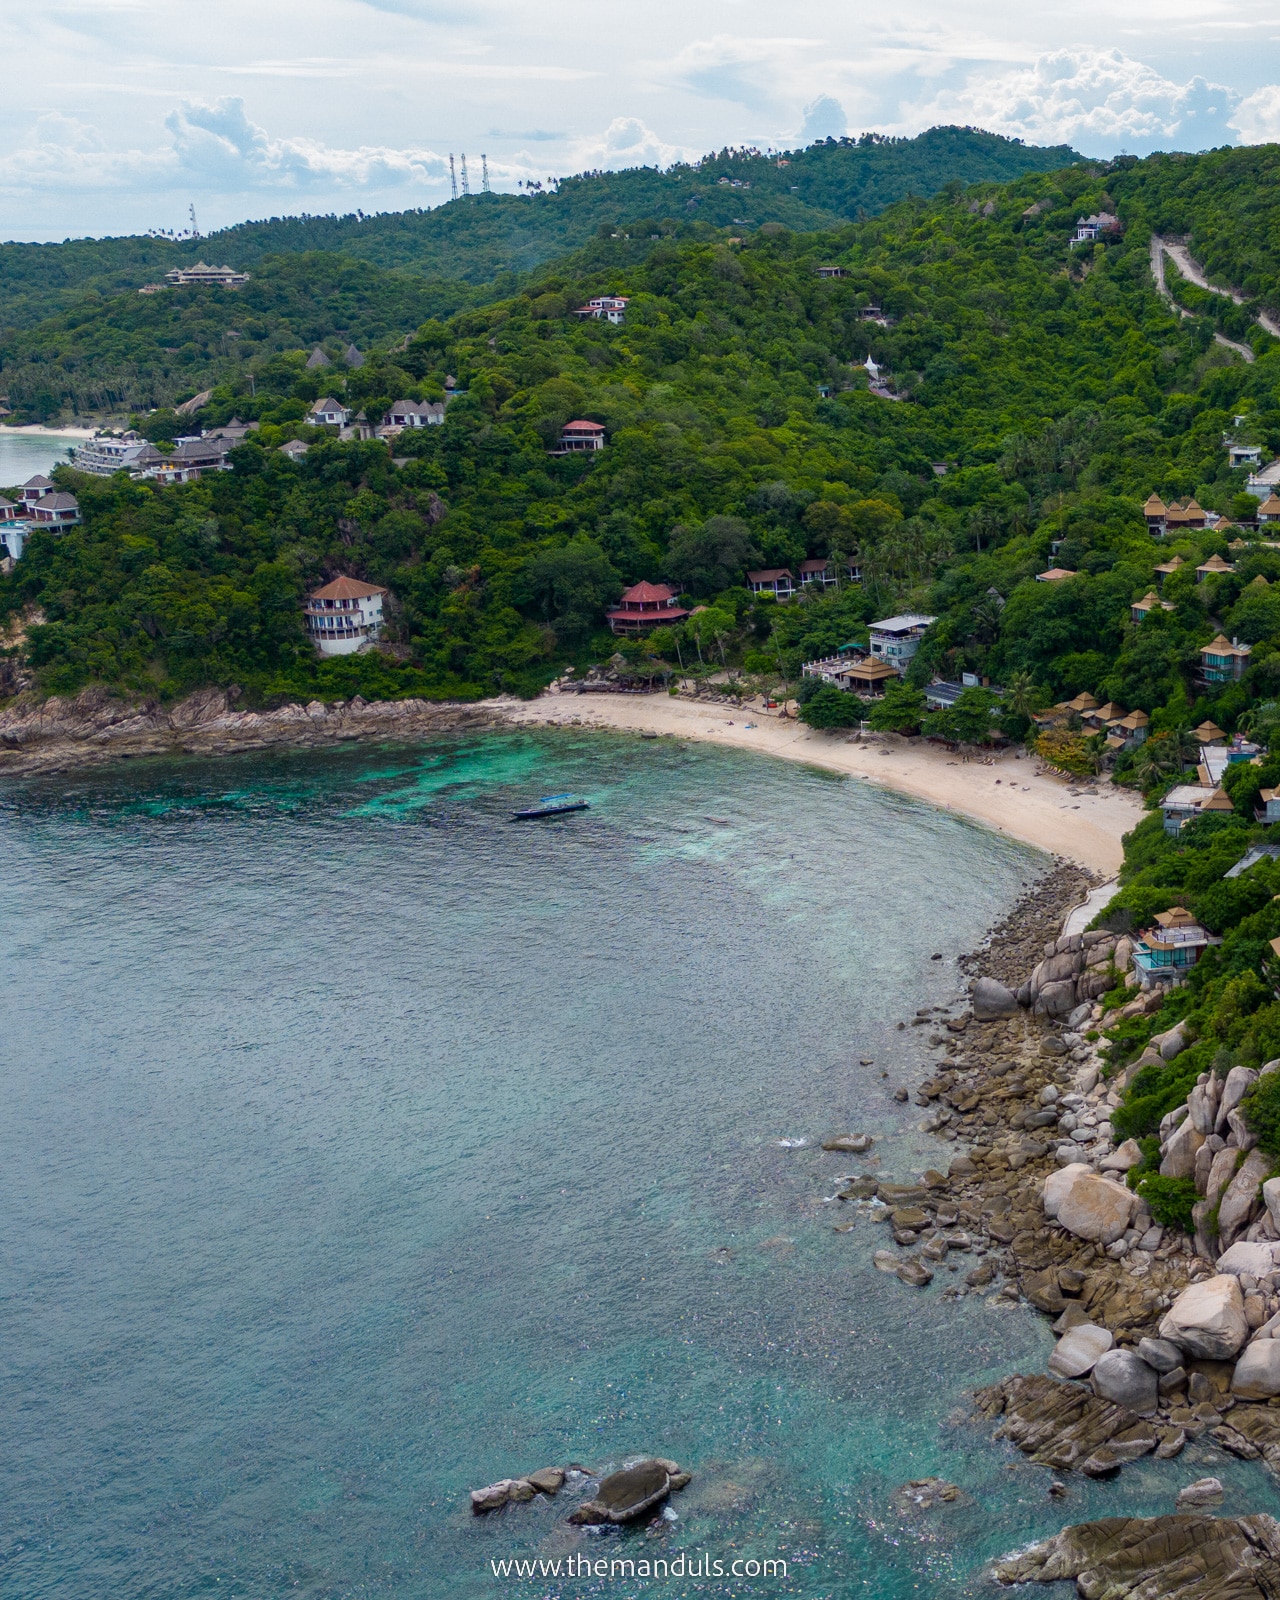 Sai Daeng Beach drone, best things to do on Koh Tao, BEst places Koh Tao, attractions, snorkeling Koh Tao, Koh Tao Best Beaches, Koh Tao Itinerary